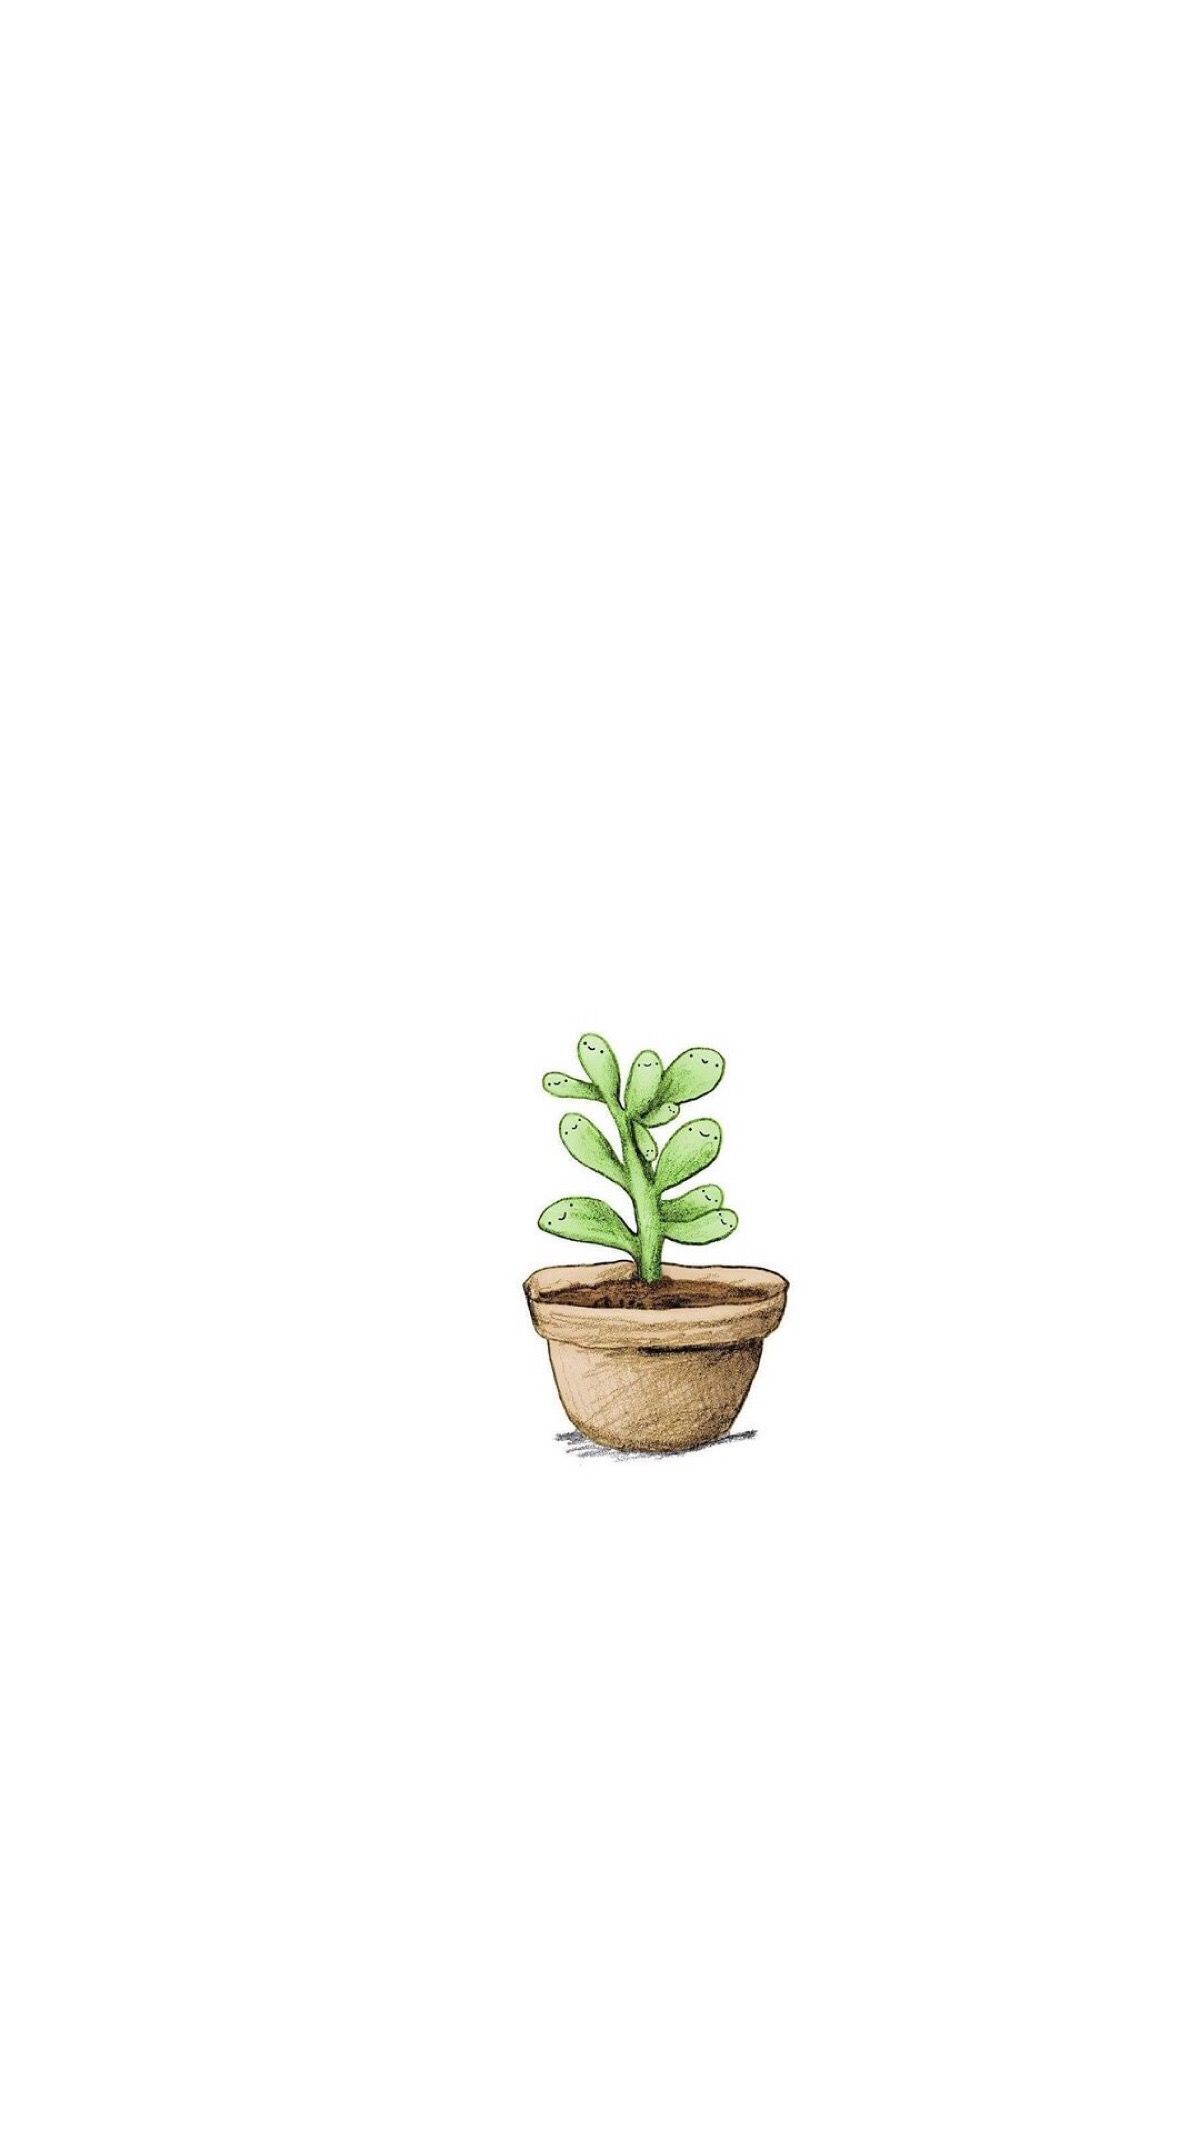 A drawing of an indoor plant in pot - Cactus, succulent